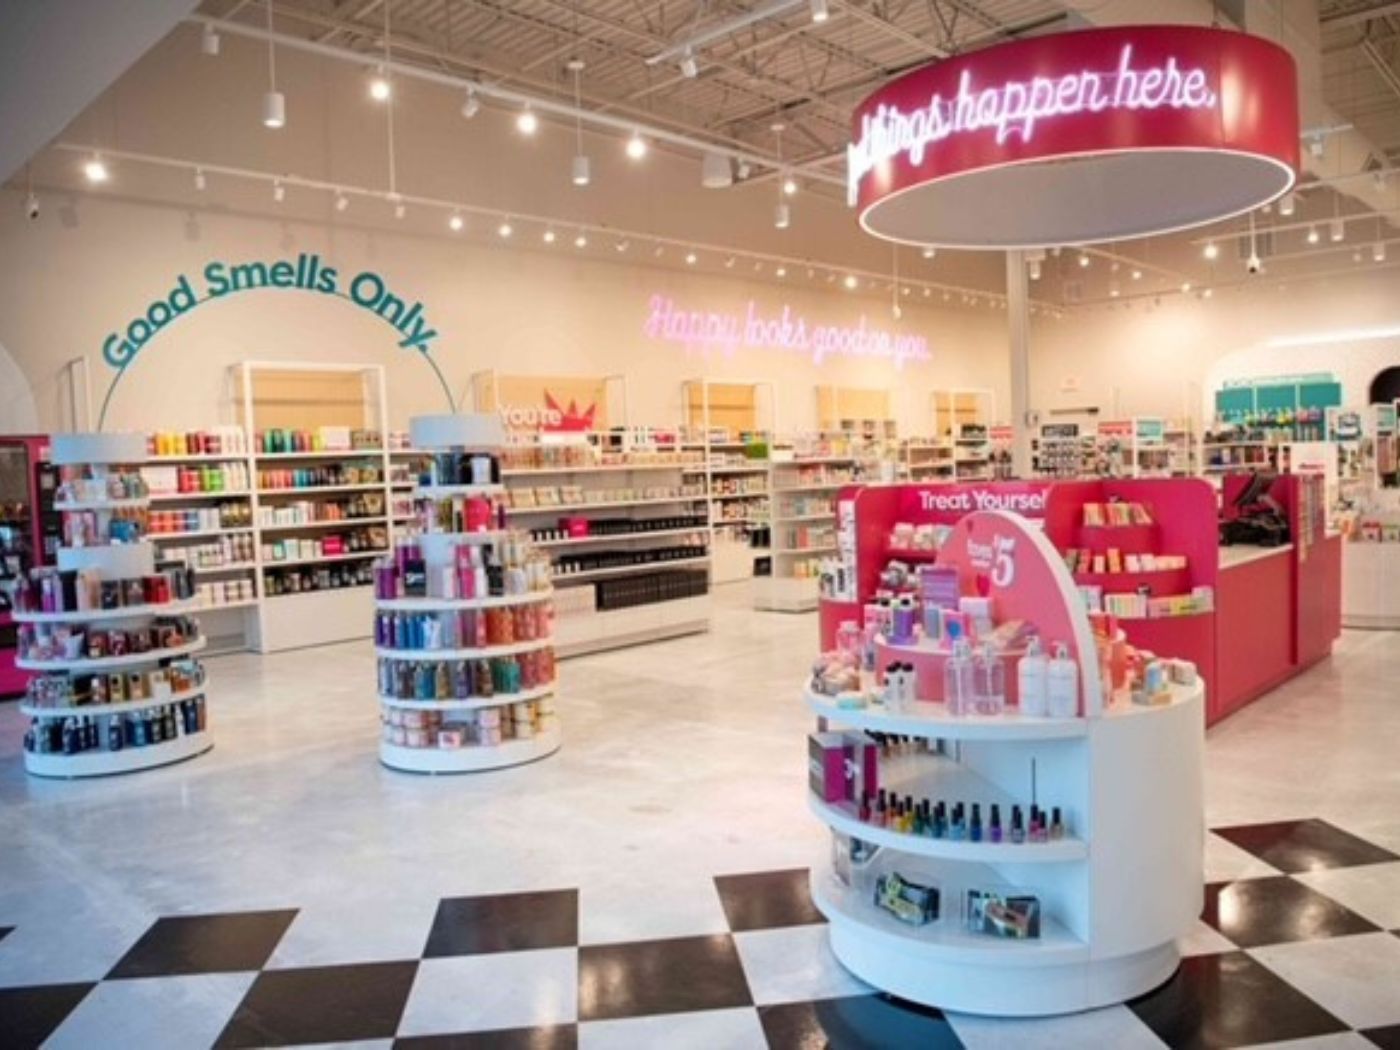 The Happy Beauty Co. store